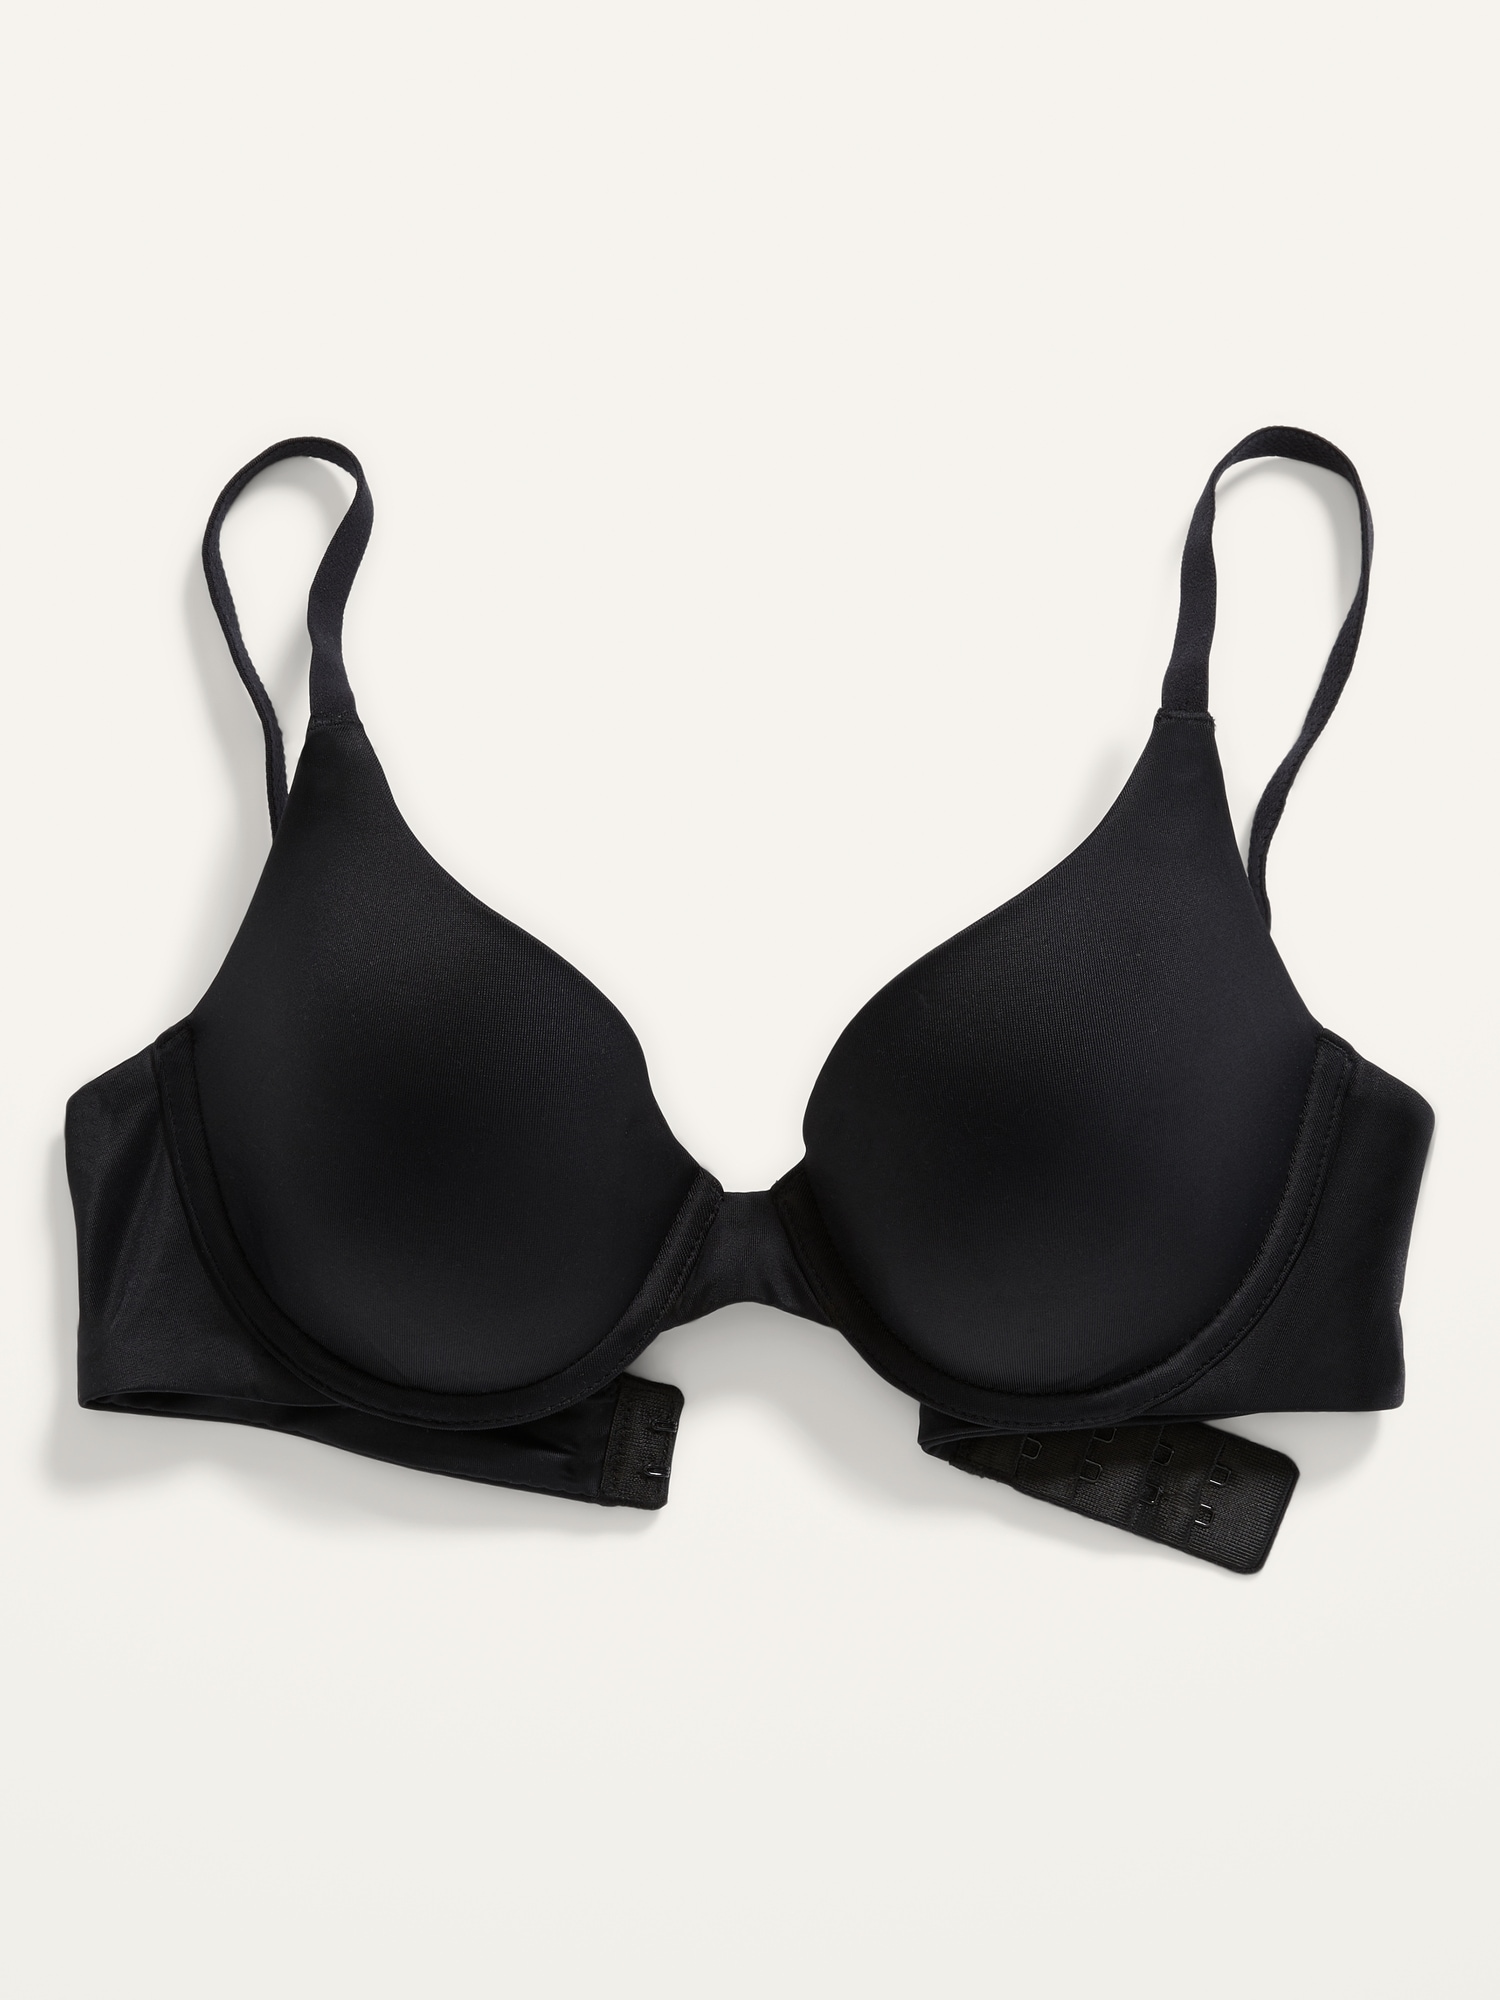 Cathalem Bras for Women - Bra for Women with Support - from Small to Plus  Size Lingerie T-Shirt Bras for Women Full Coverage(Black,44/100D) 